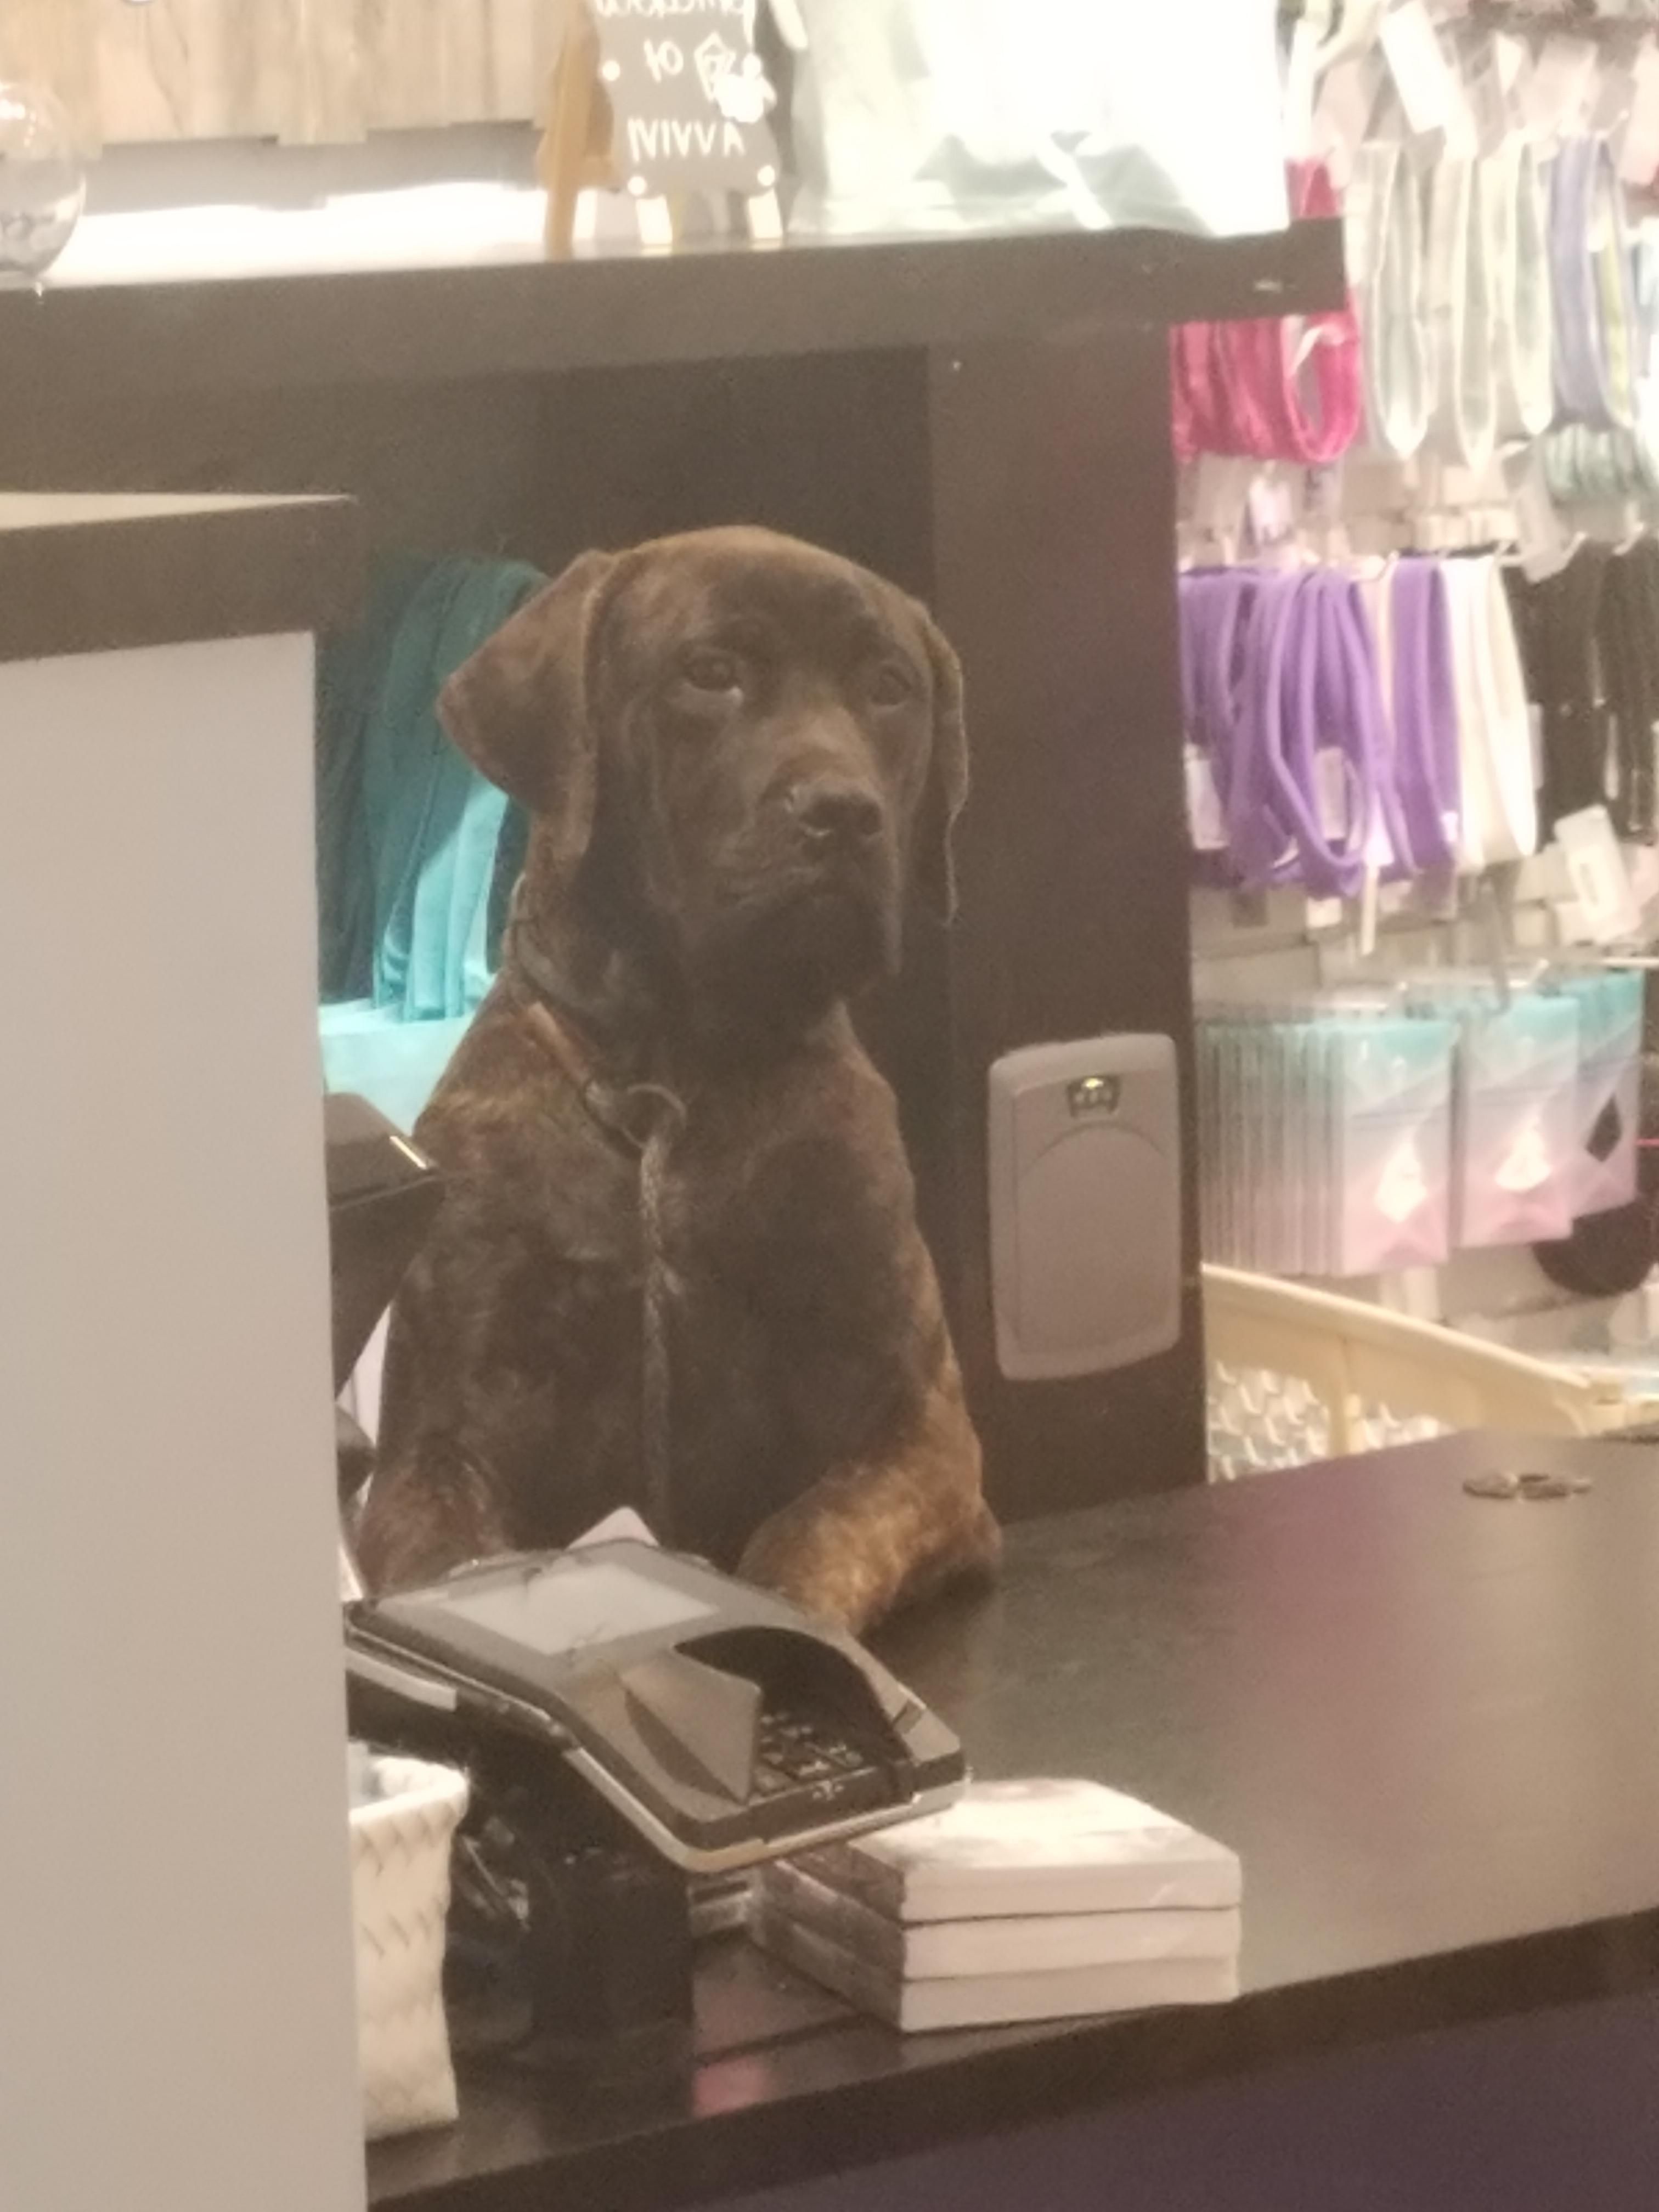 "Yes we accept cash or head scratches"